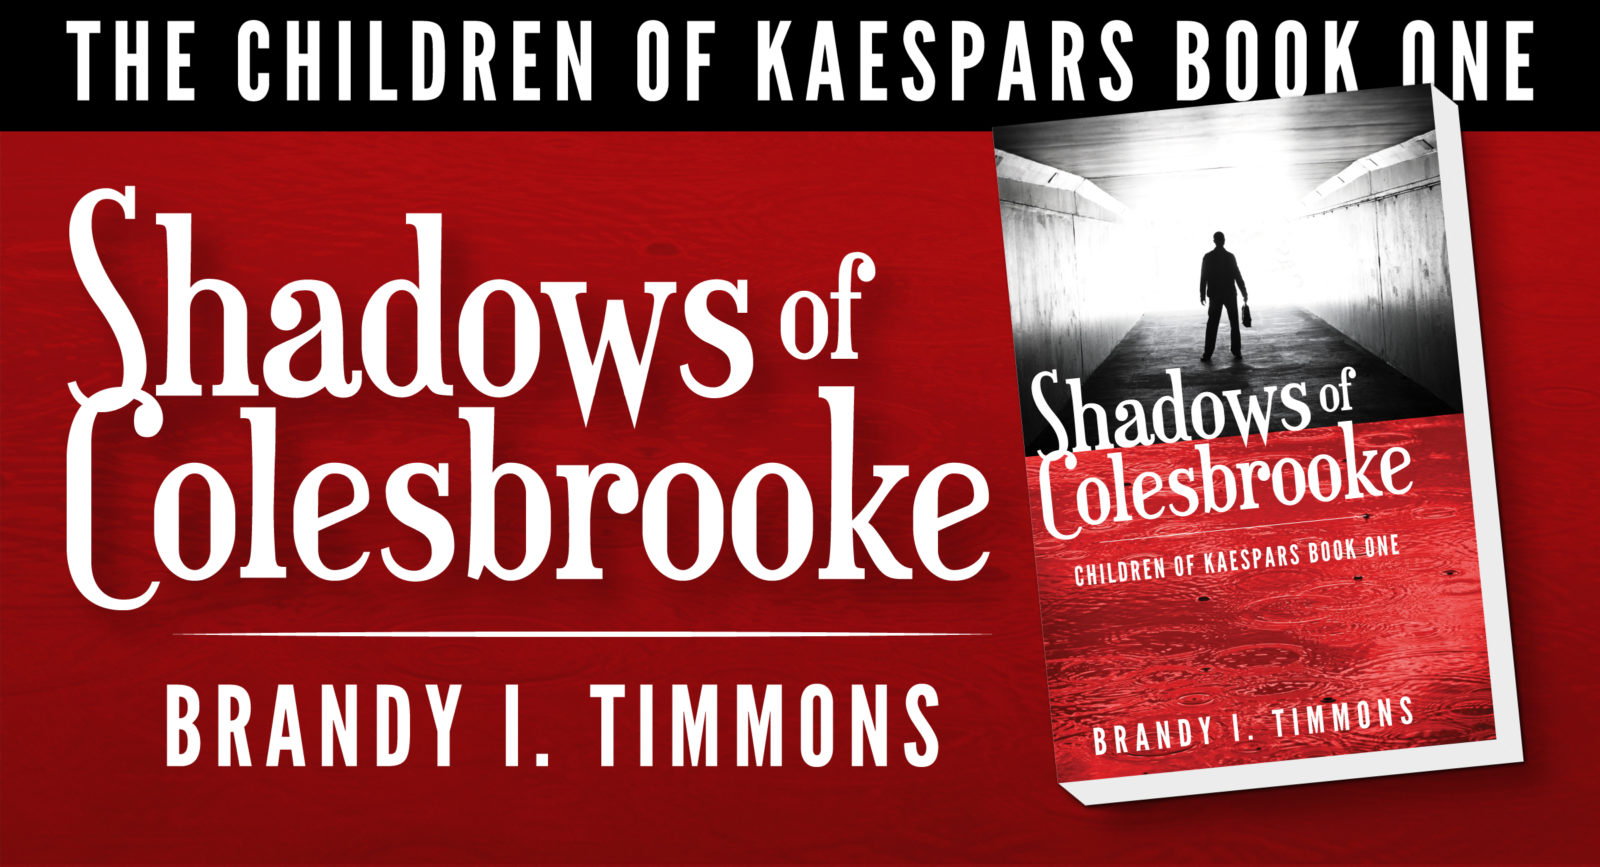 Shadows of Colesbrooke by Brandy I Timmons book 1 of Children of Kaespars